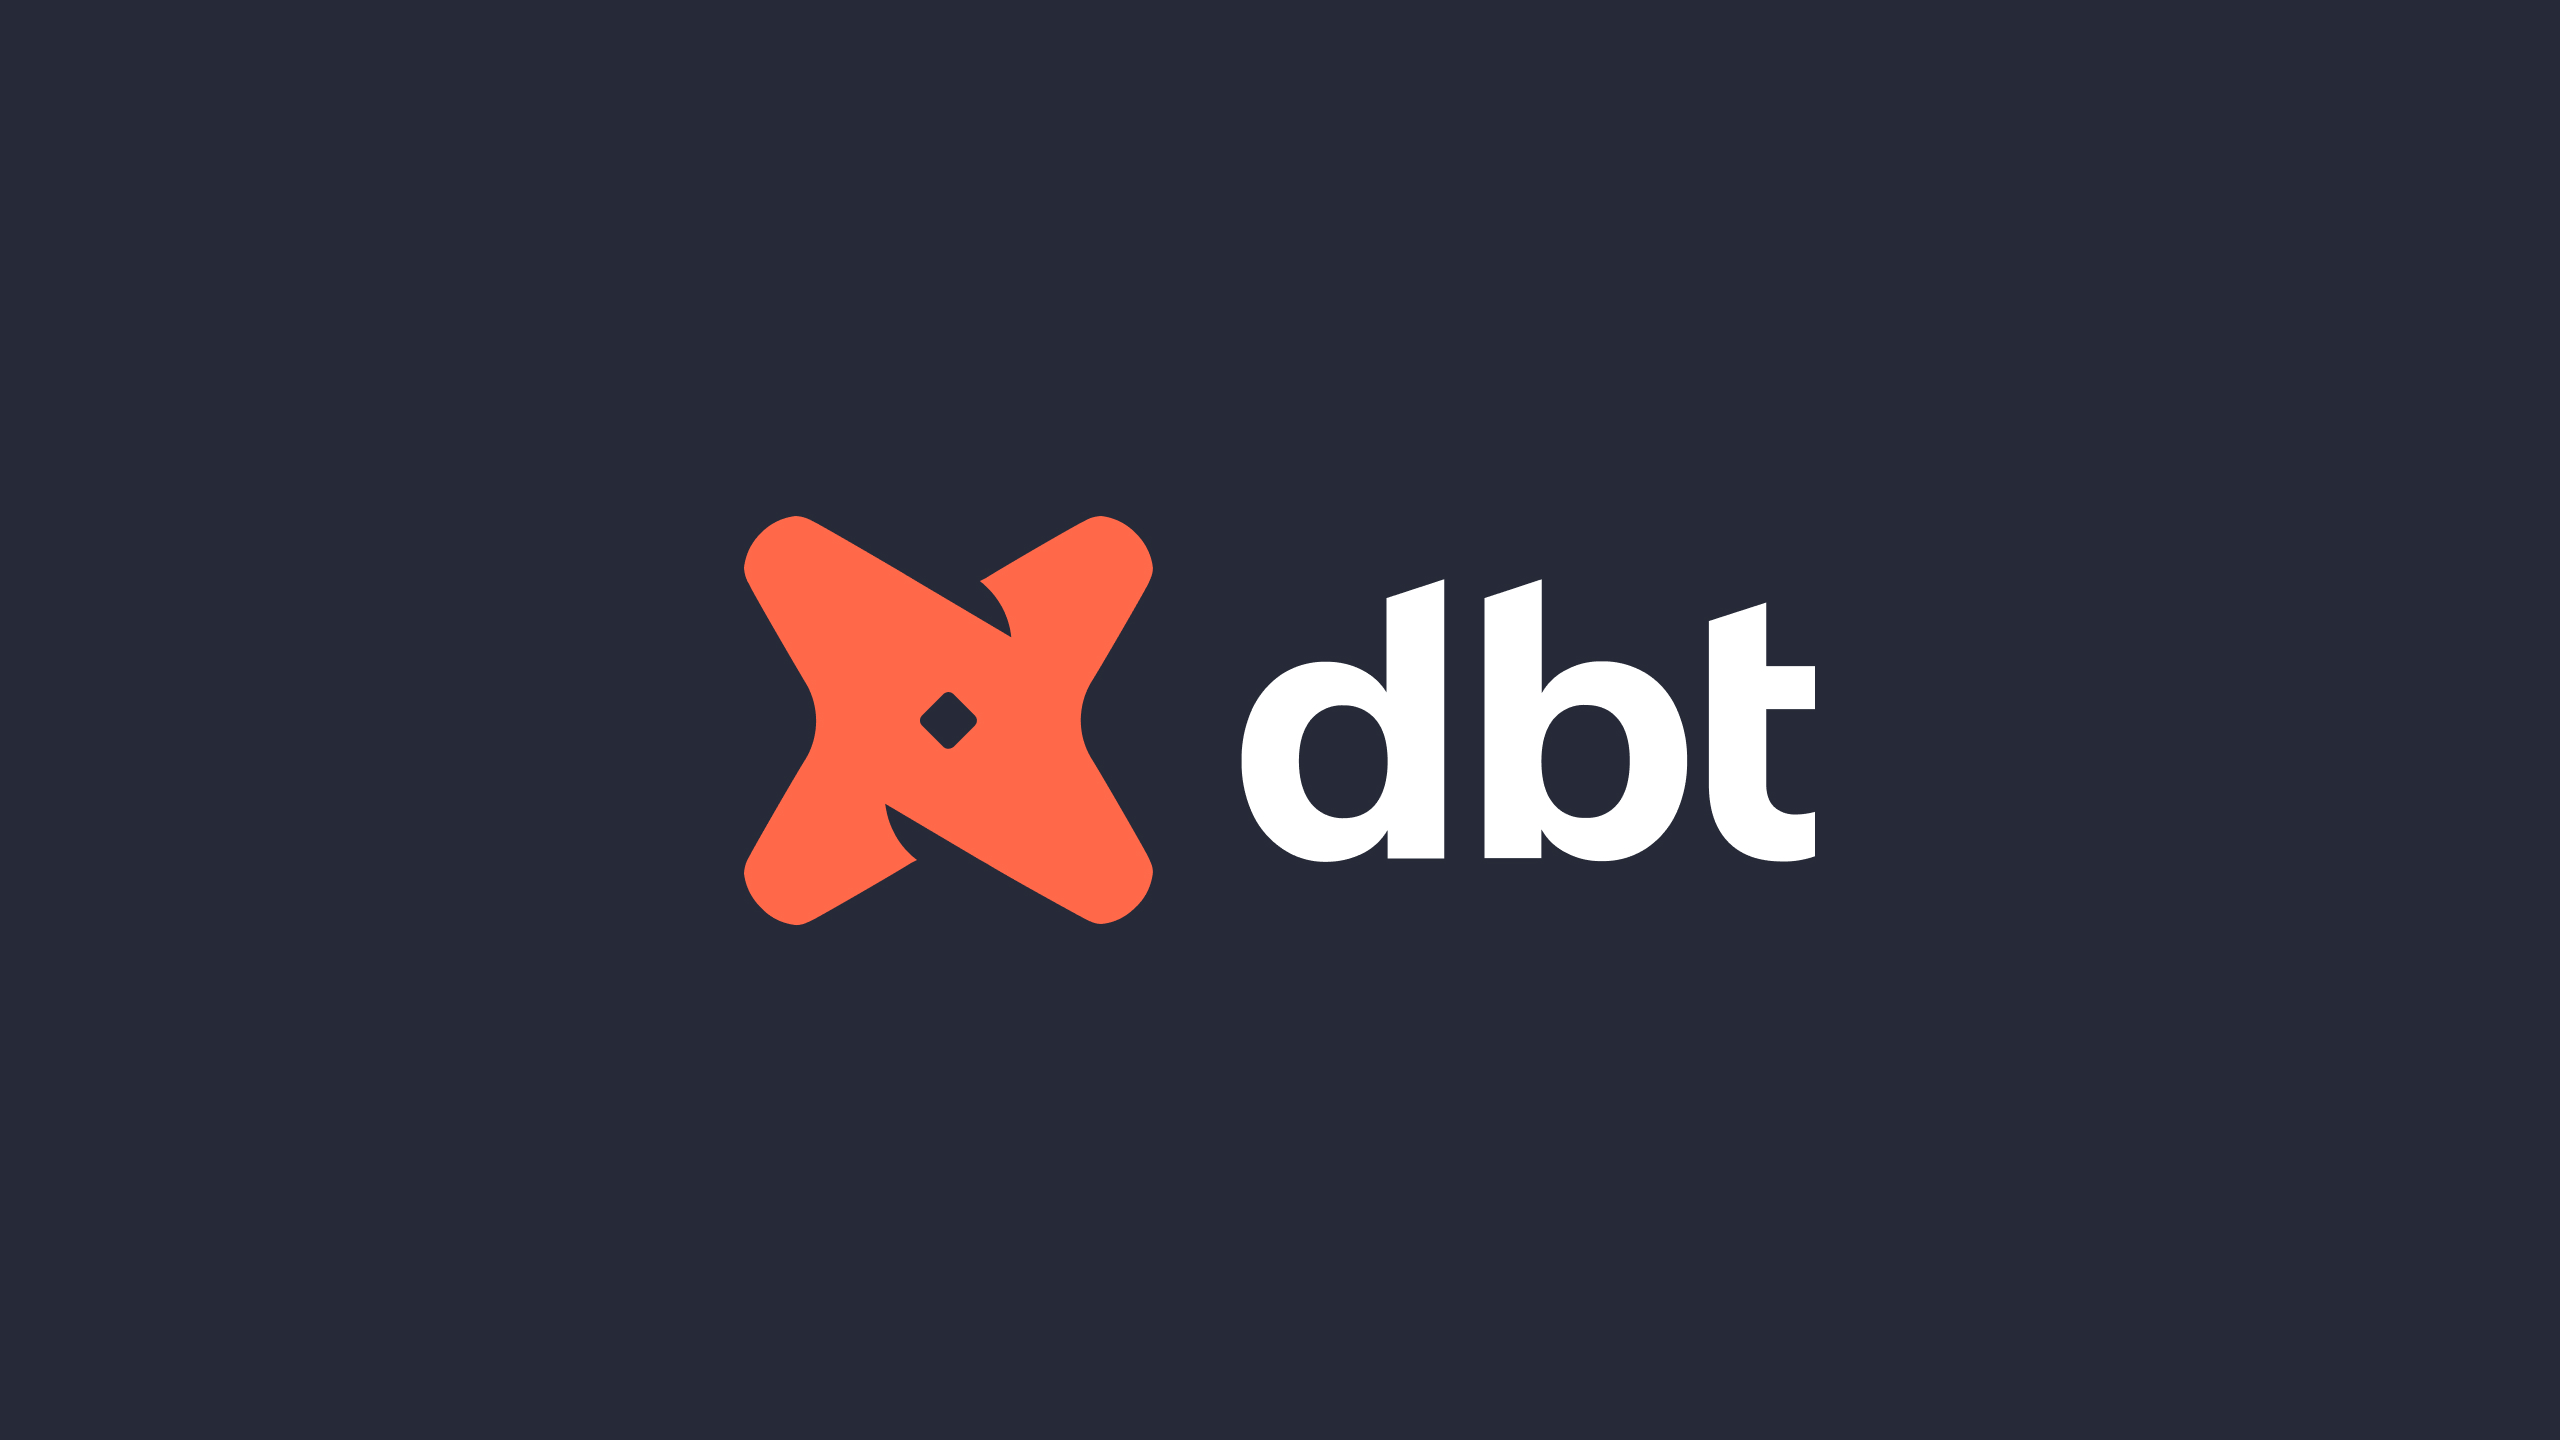 Updating dbt Cloud pricing to support long-term community growth